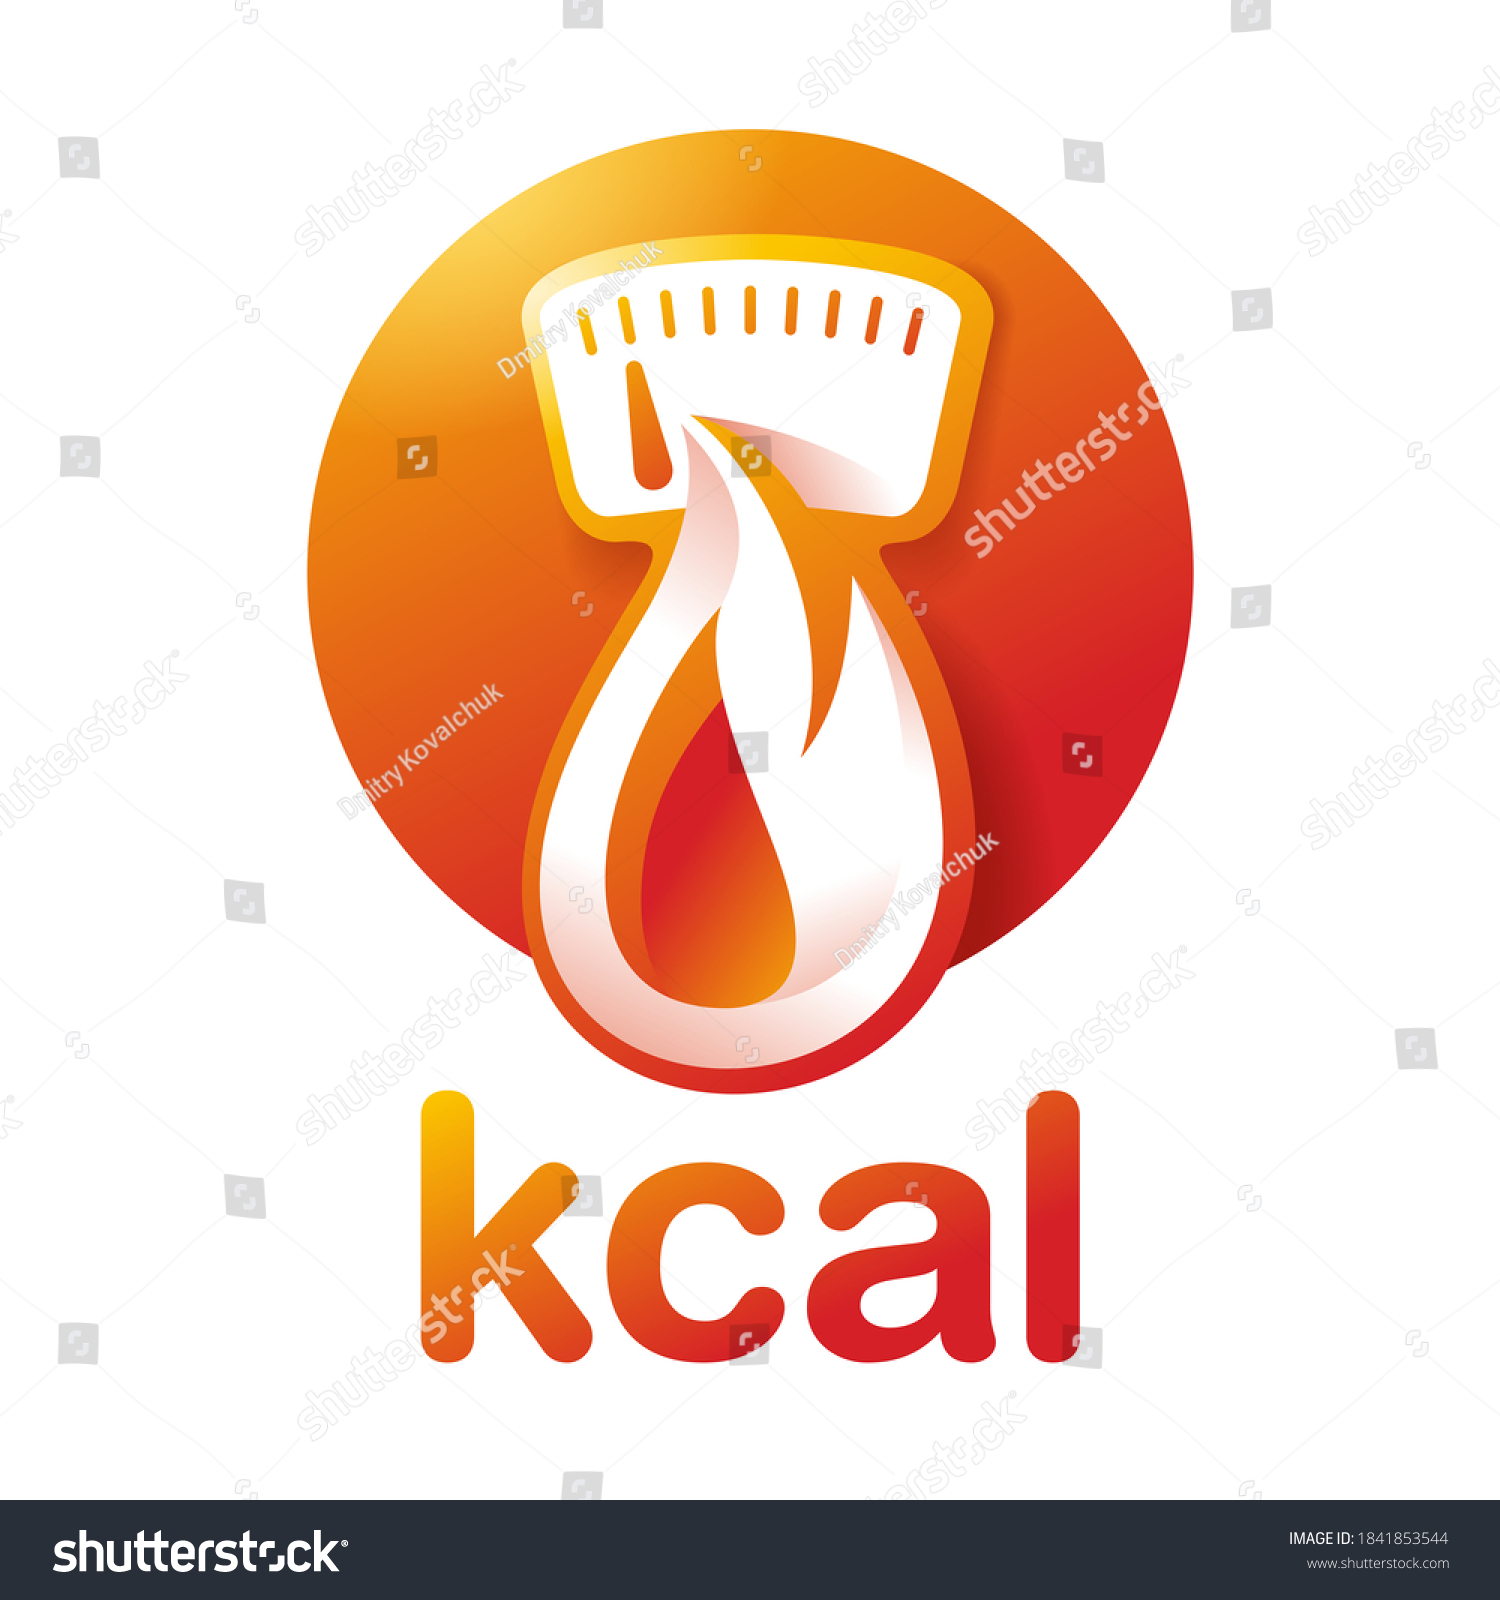 SVG of kcal icon (calories sign) combination of flame (fat burning) and weight scales dial - isolated vector emblem for healthy food, fitness or diet program packaging svg